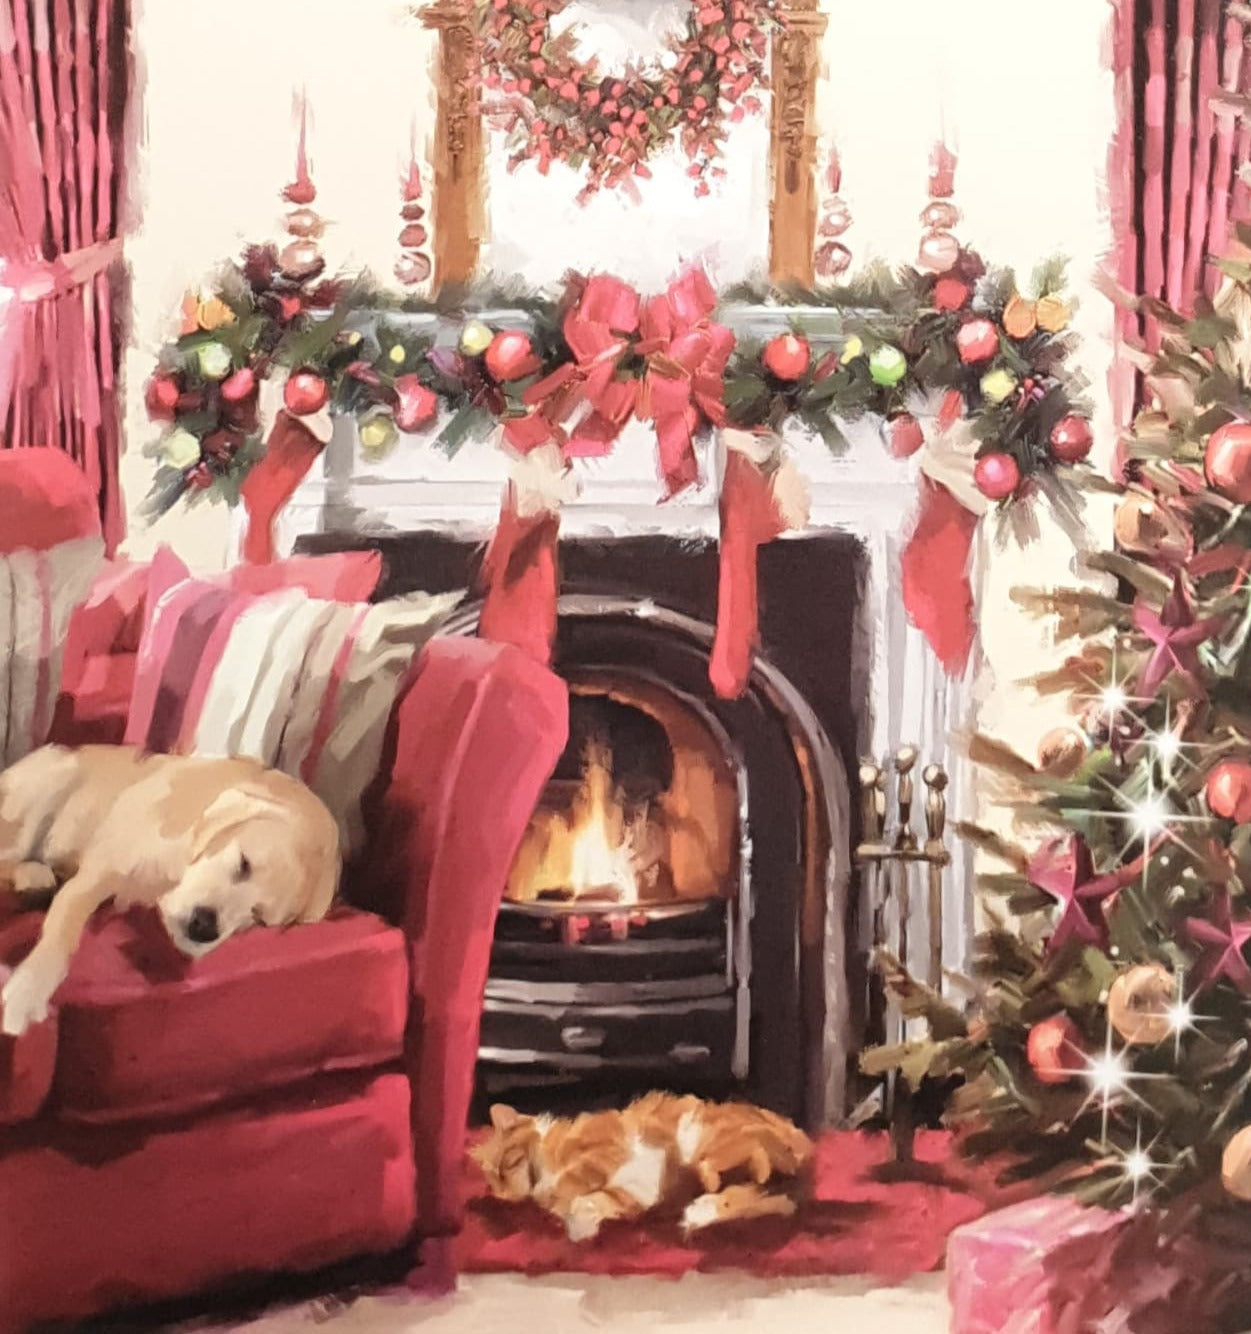 Charity Christmas Cards - Pack of 8 / Down Syndrome Ireland - Dog & Cat Sleeping at Fireplace